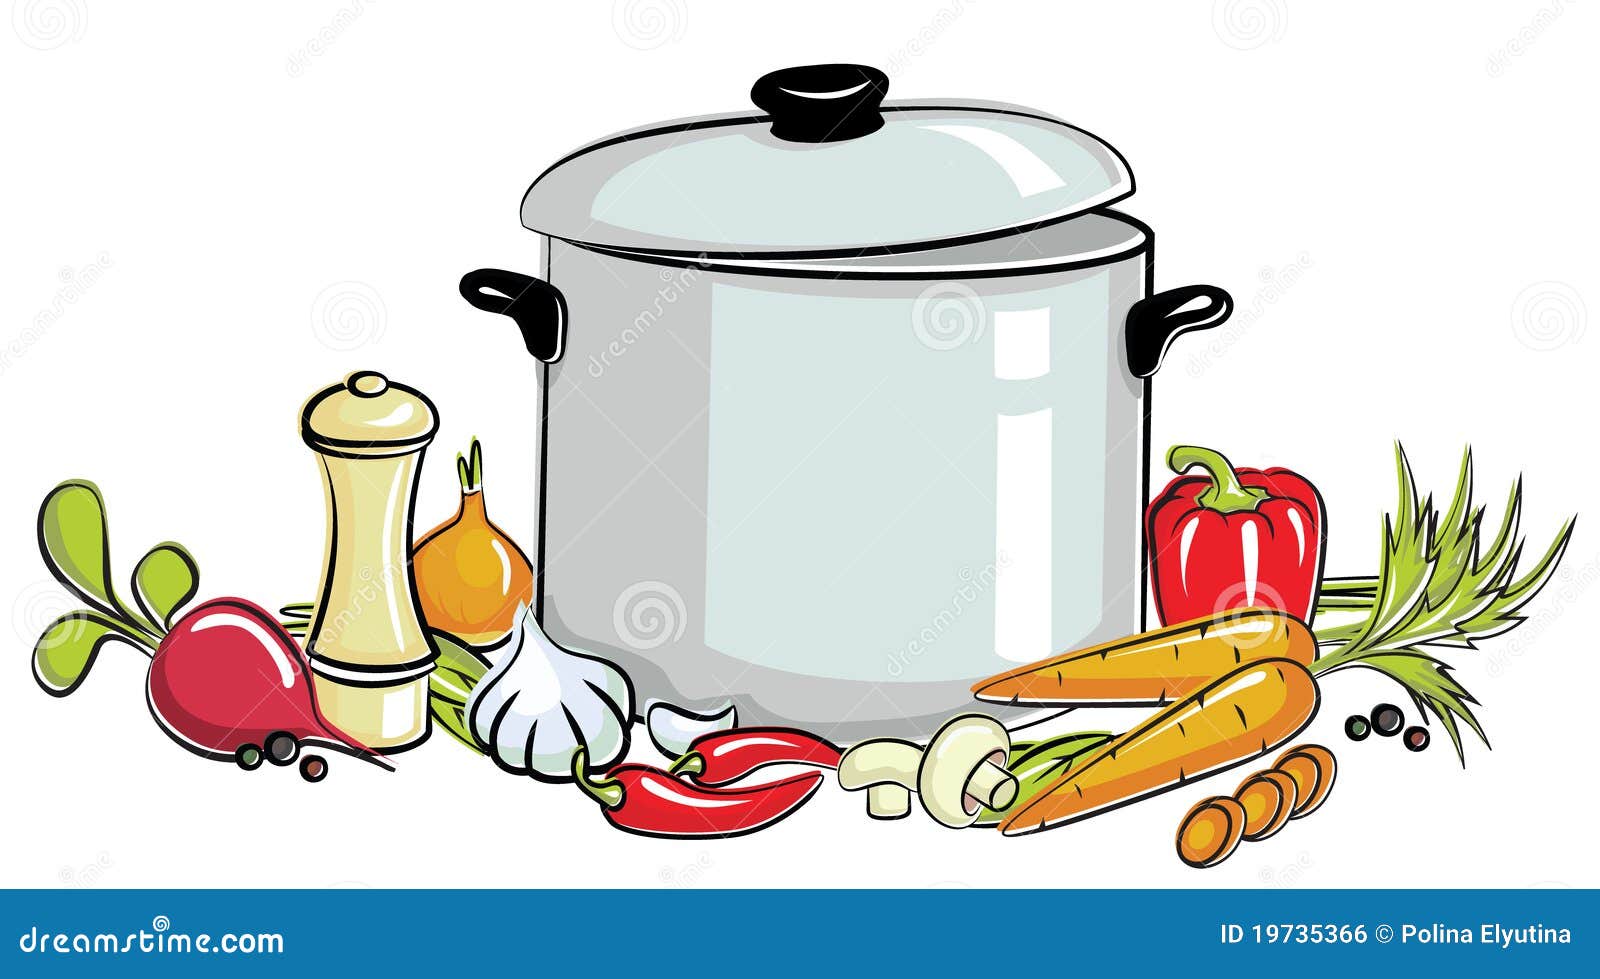 clipart chicken soup - photo #44